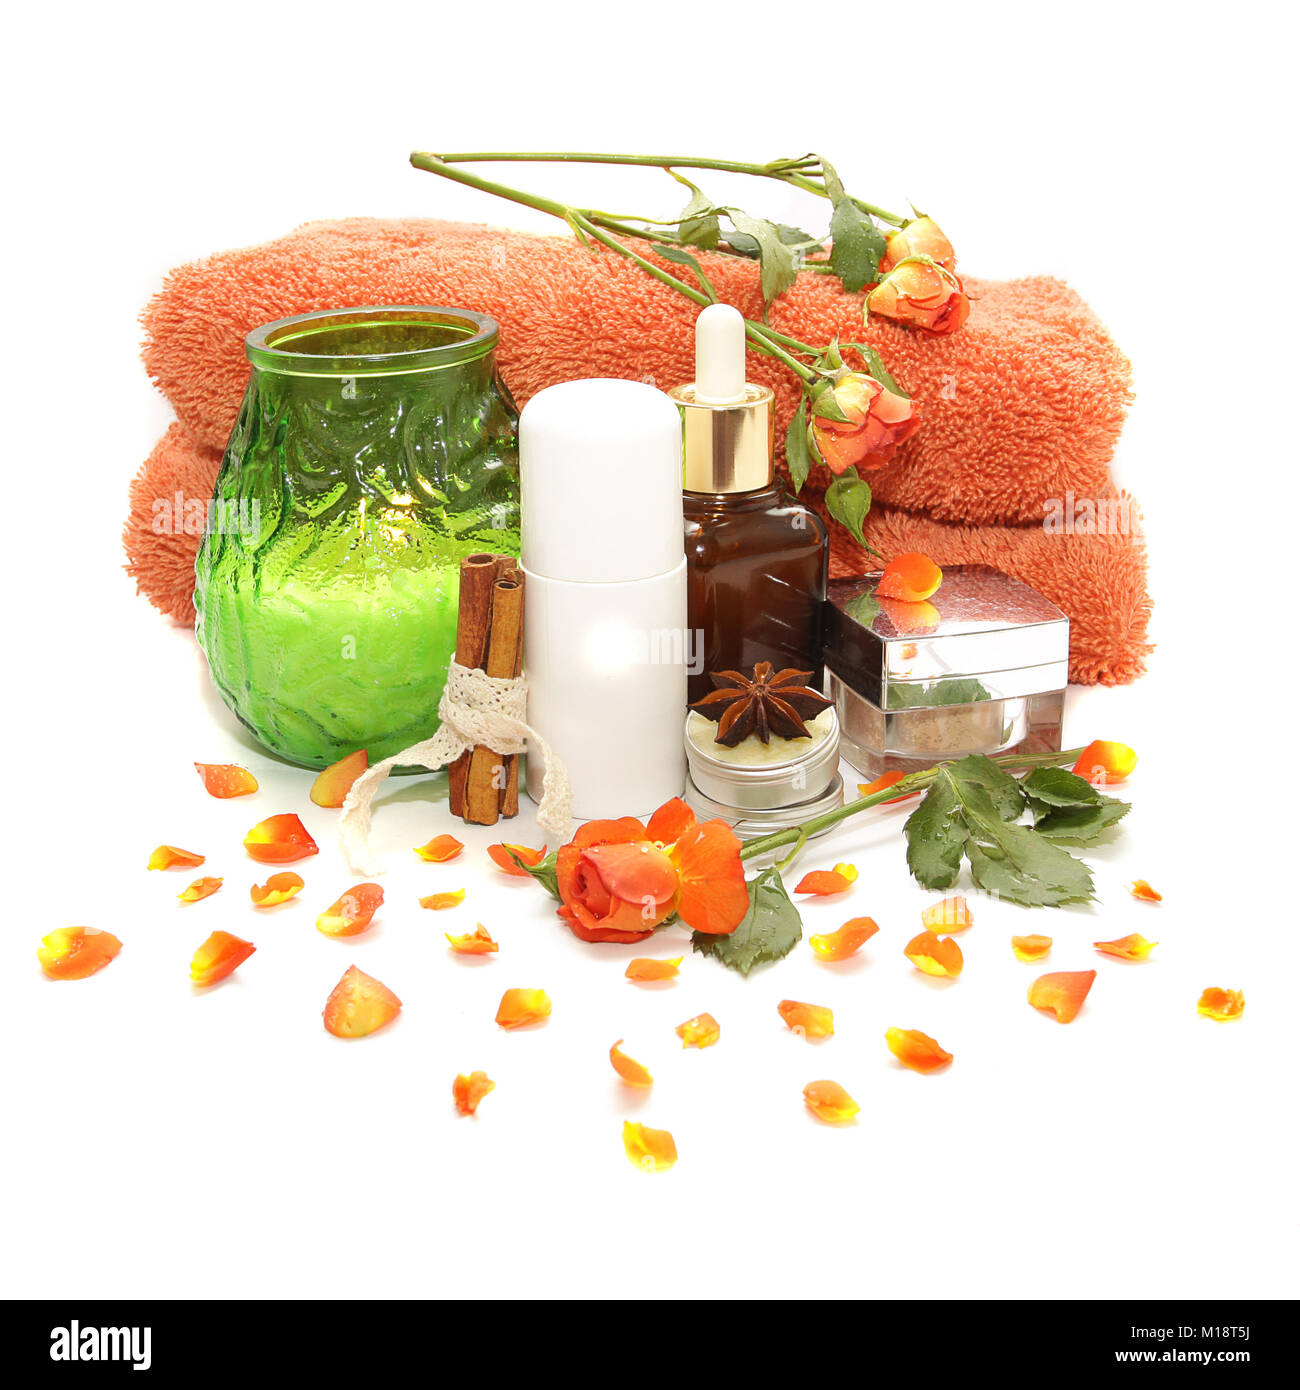 Spa products, cosmetics, accessories, pink and orange roses Stock Photo